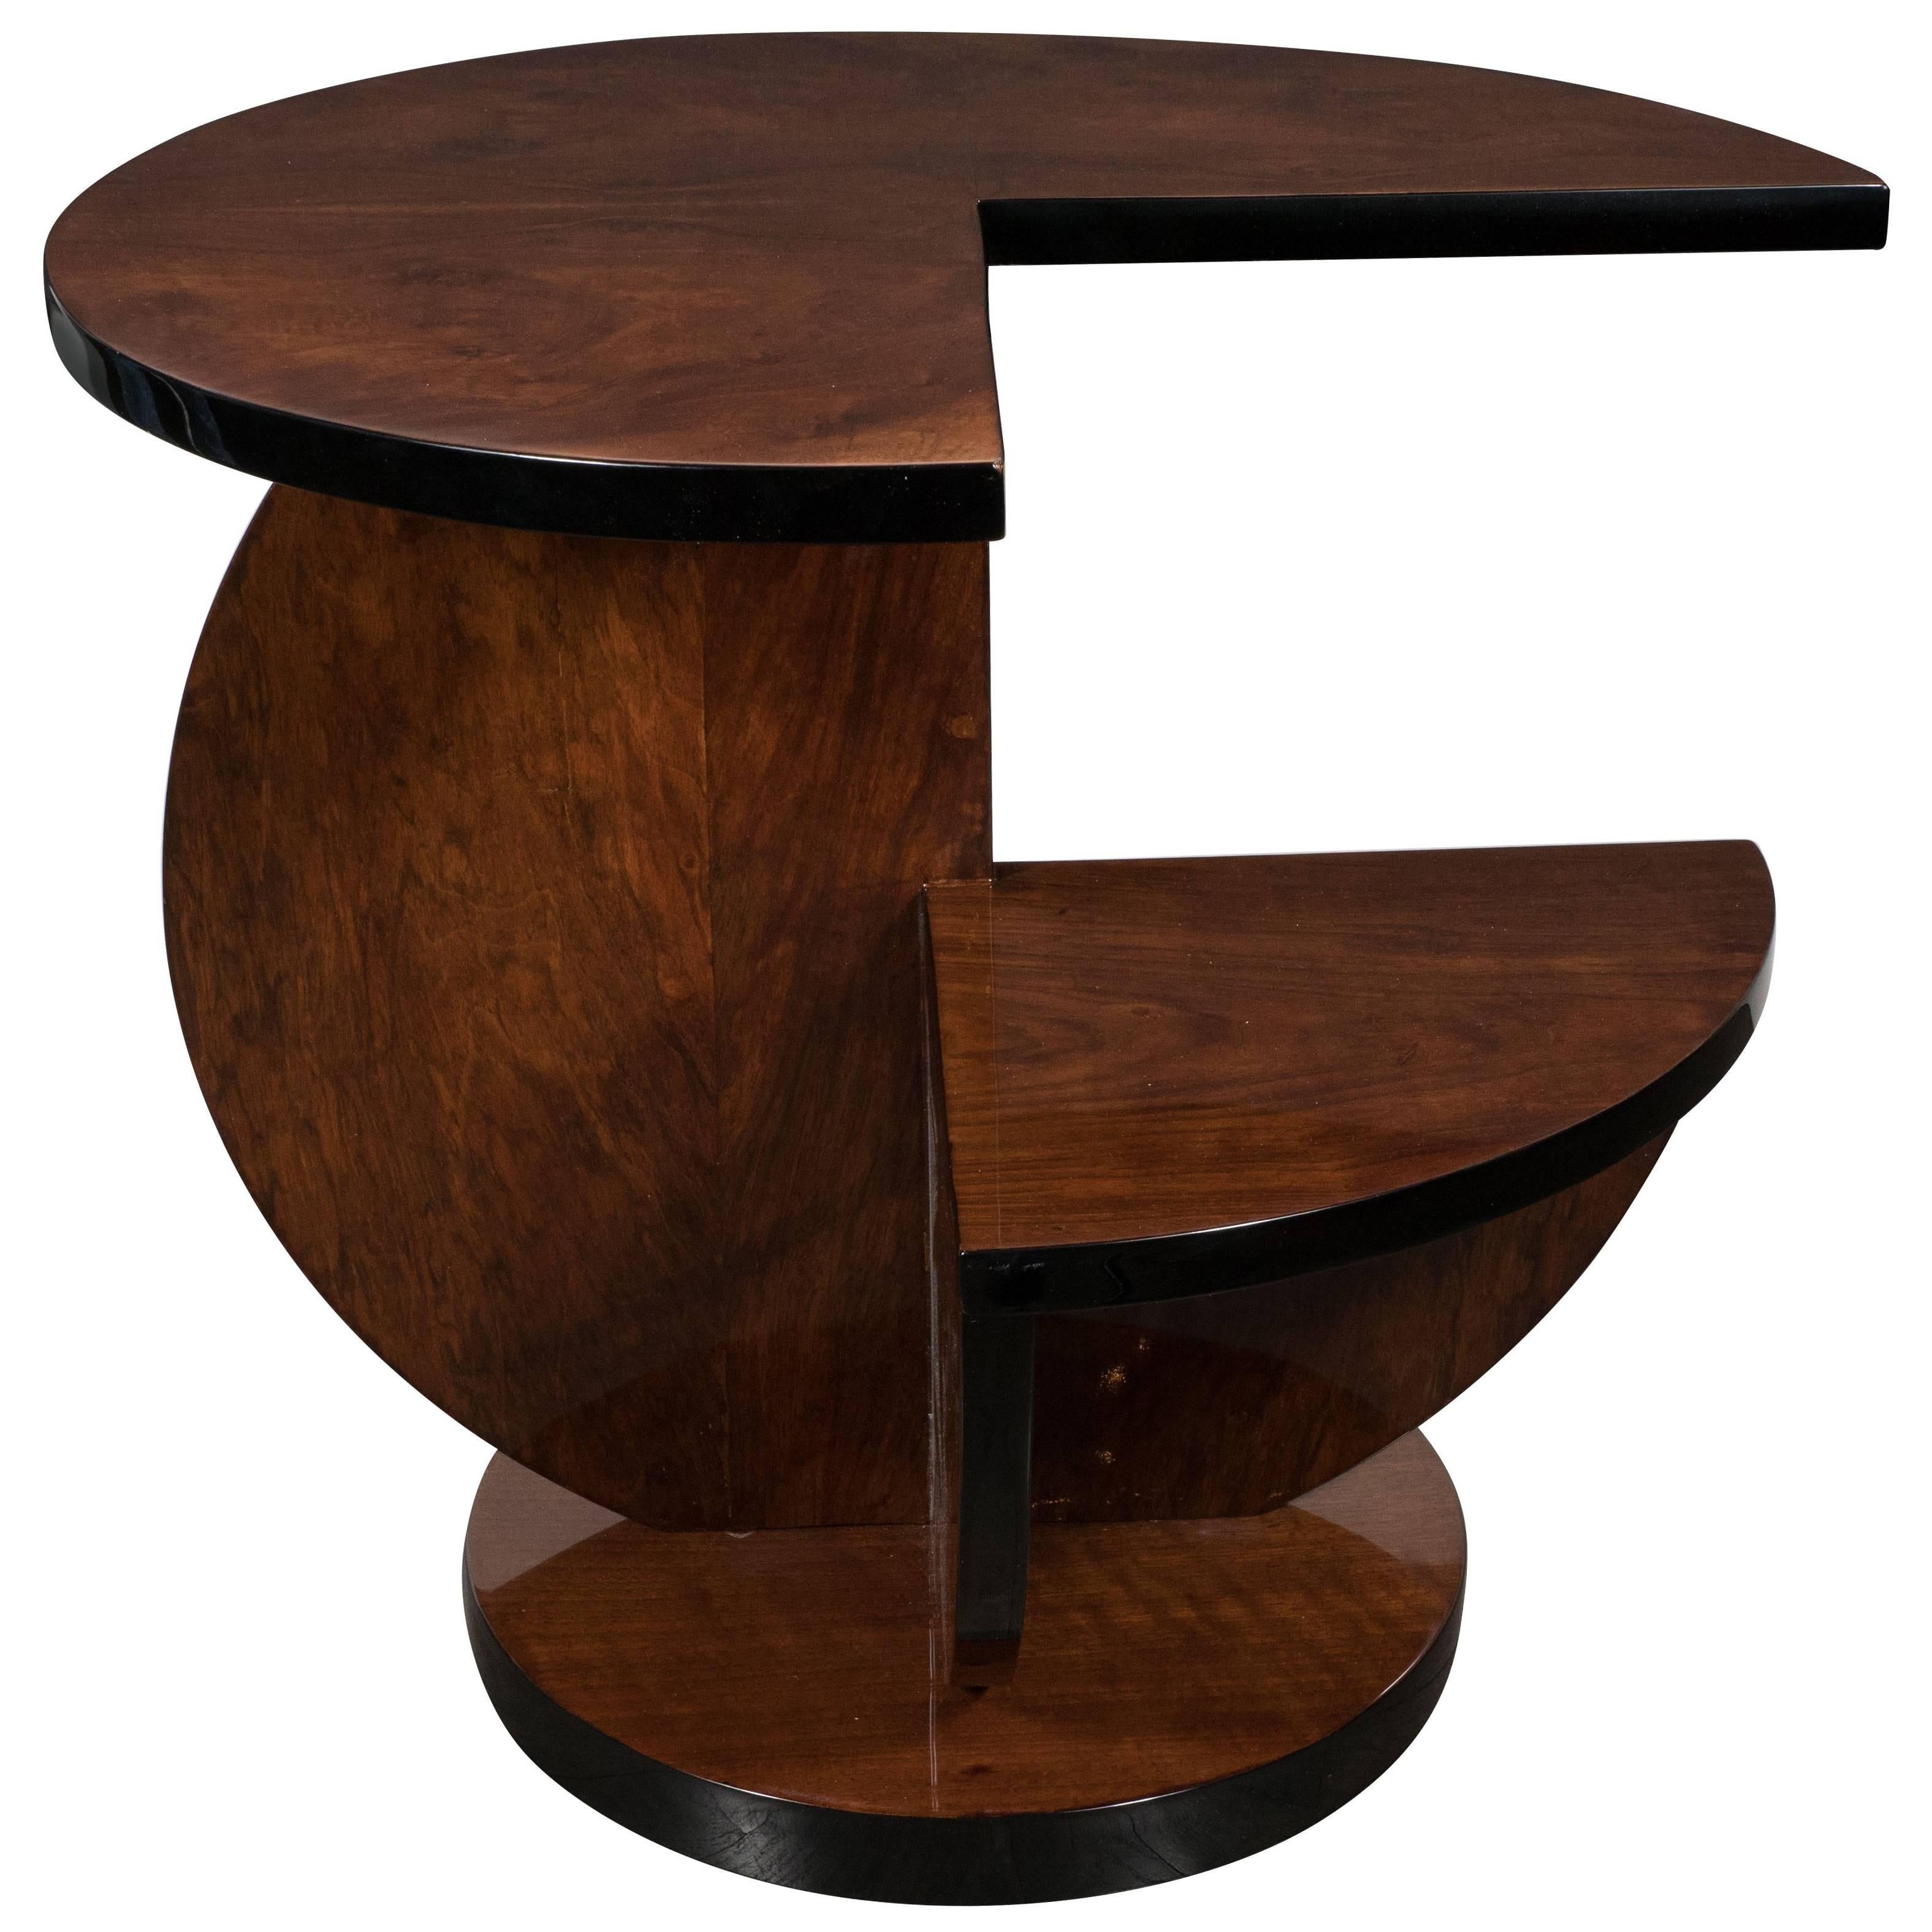 French Art Deco Cubist Side Table in Bookmatched Burled Walnut and Black Lacquer